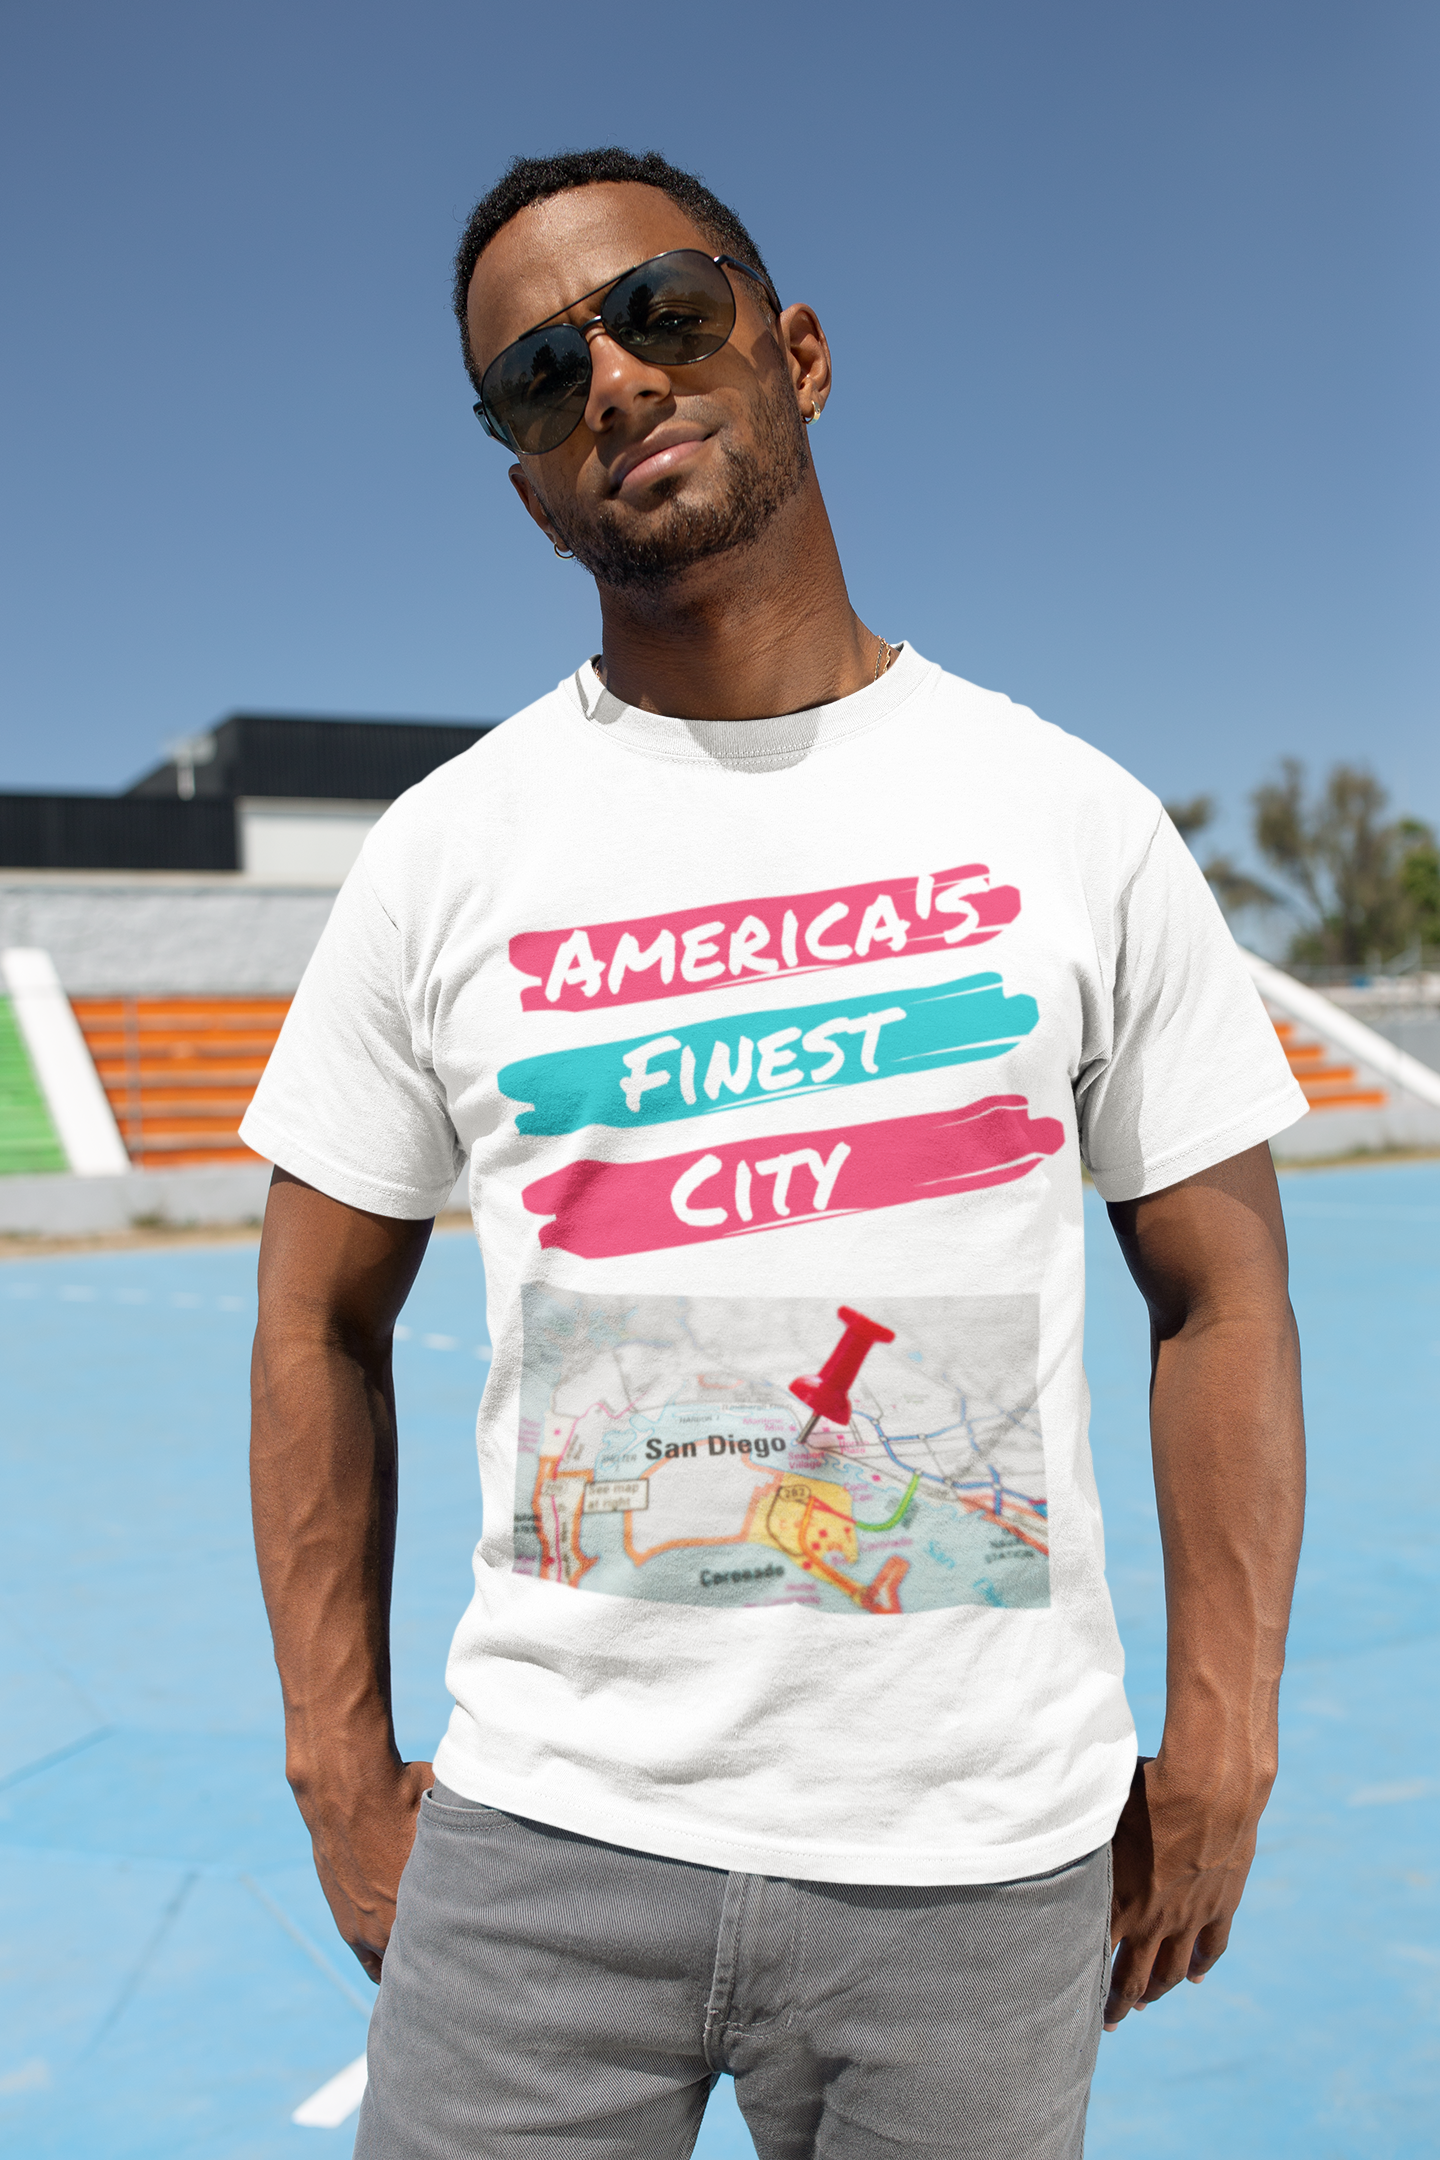 Cool black man with sunglasses standing outside downtown wearing an America's Finest City t-shirt